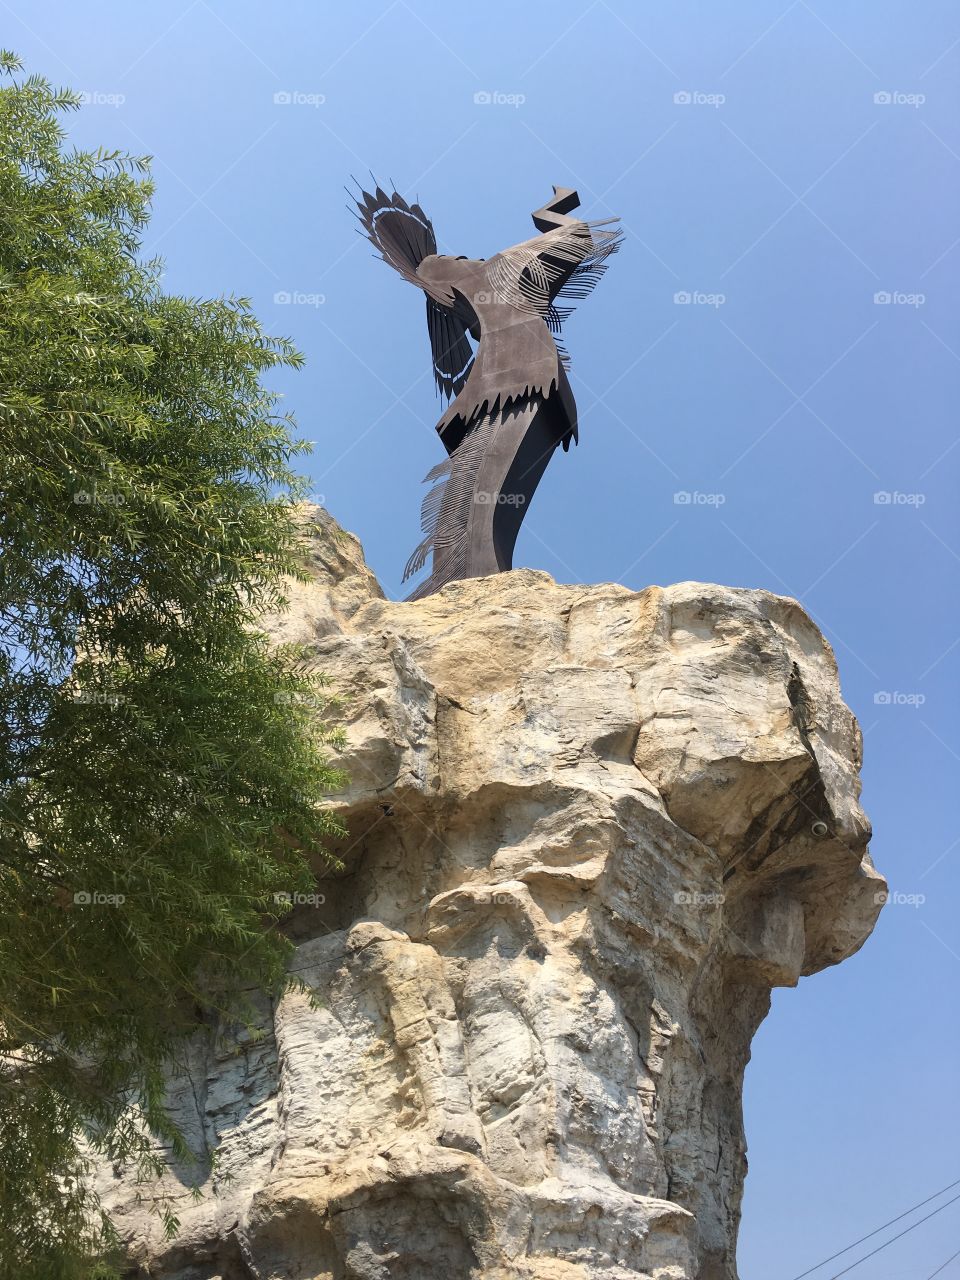 The Keeper of the Plains in Wichita, Kansas